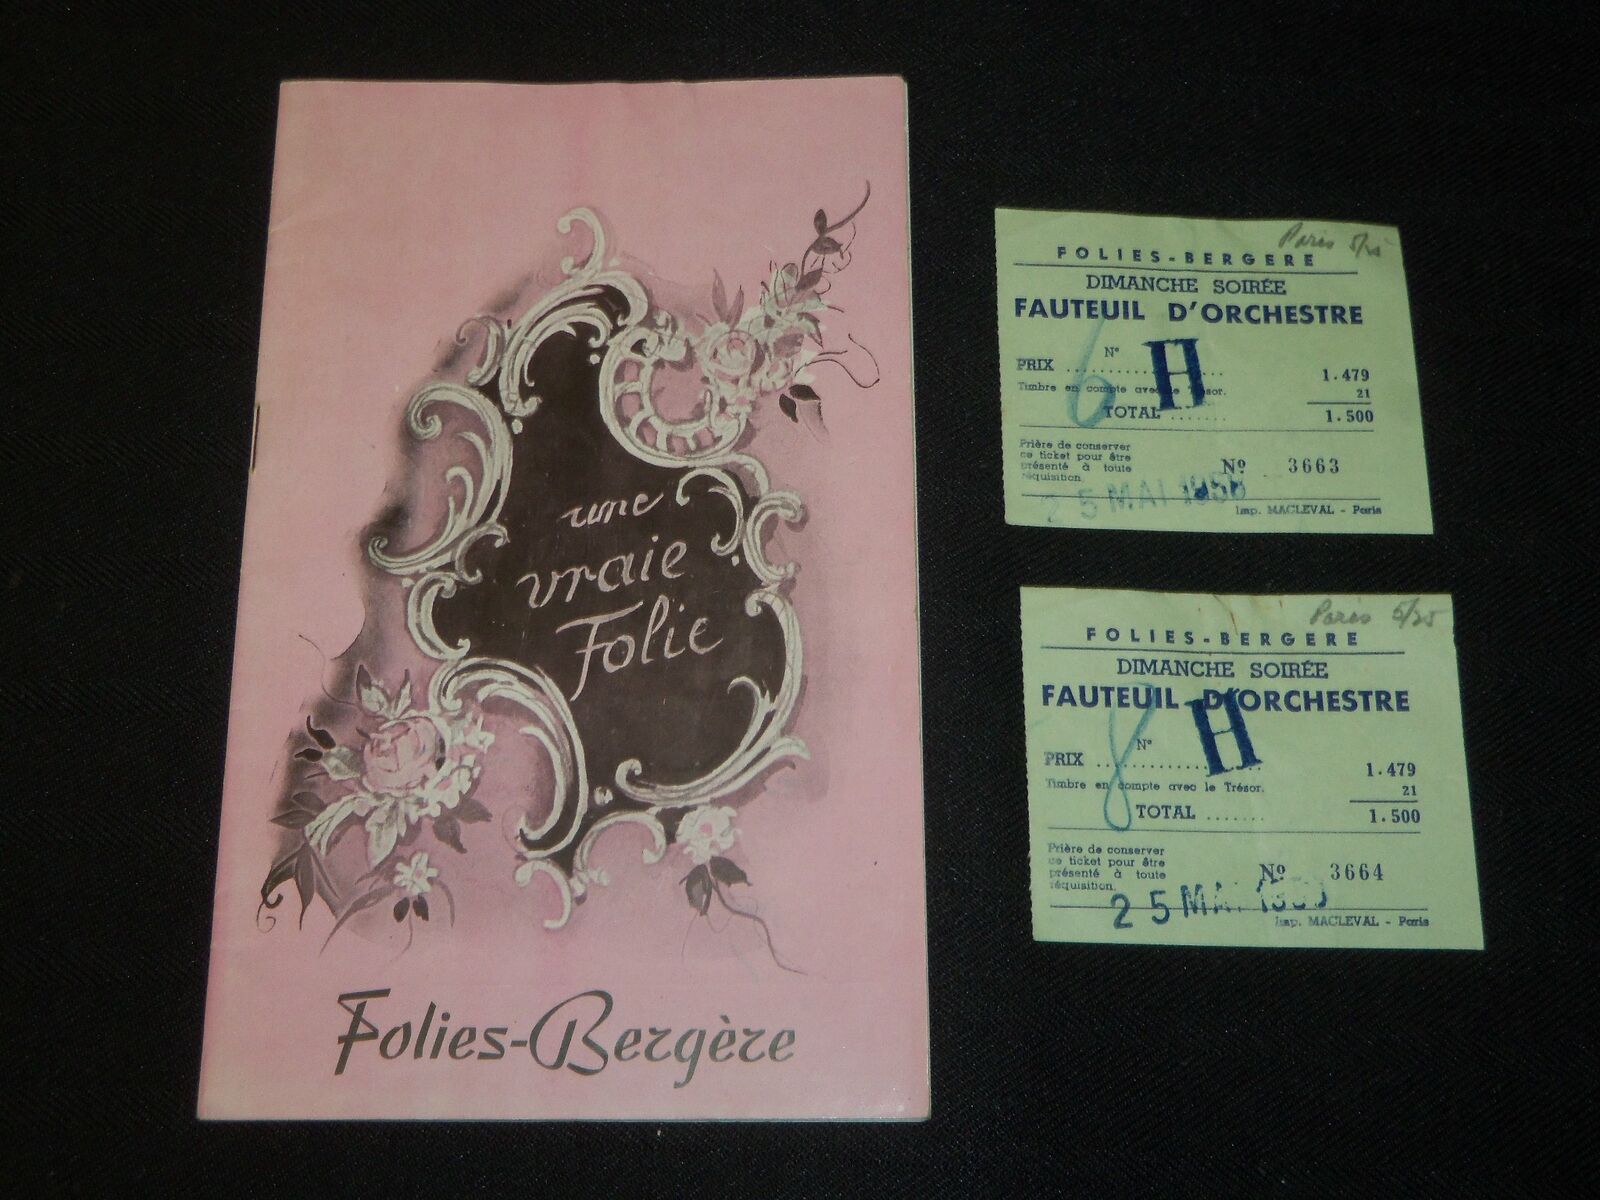 1958 MAY 25 FOLIES - BERGERE PROGRAM WITH TICKETS - PAUL DERVAL - J 5430